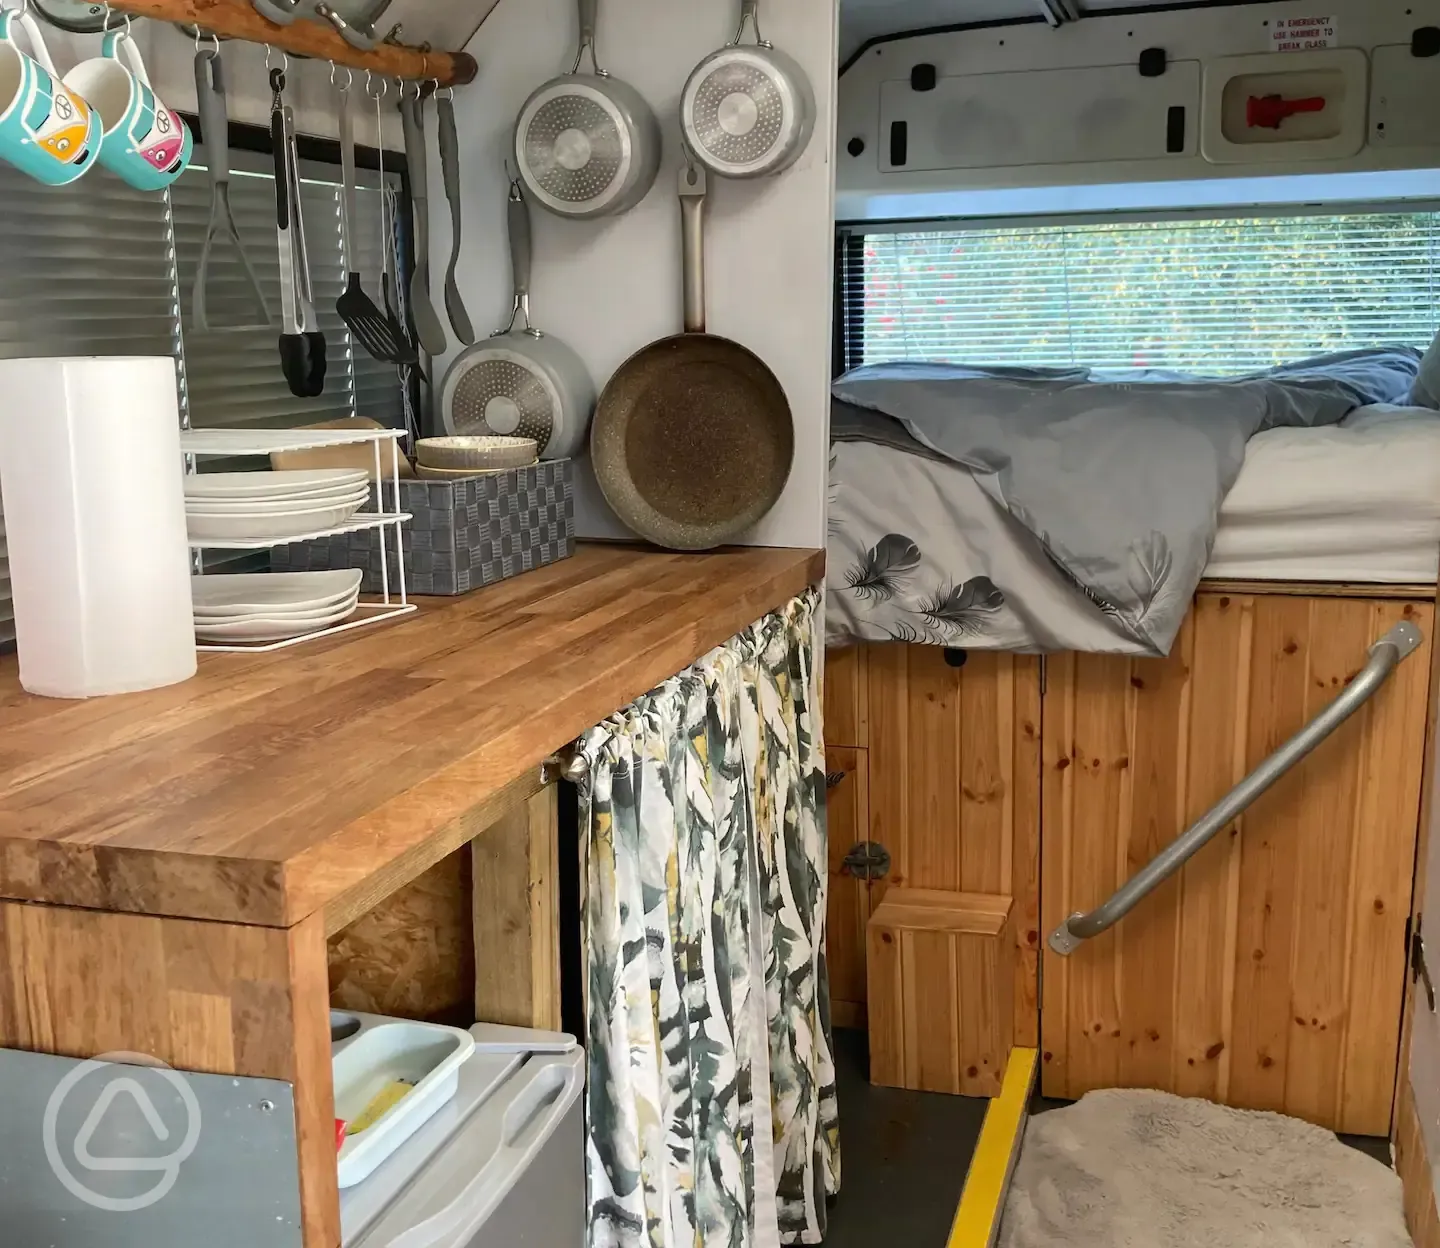 Kitchen and bed in bus